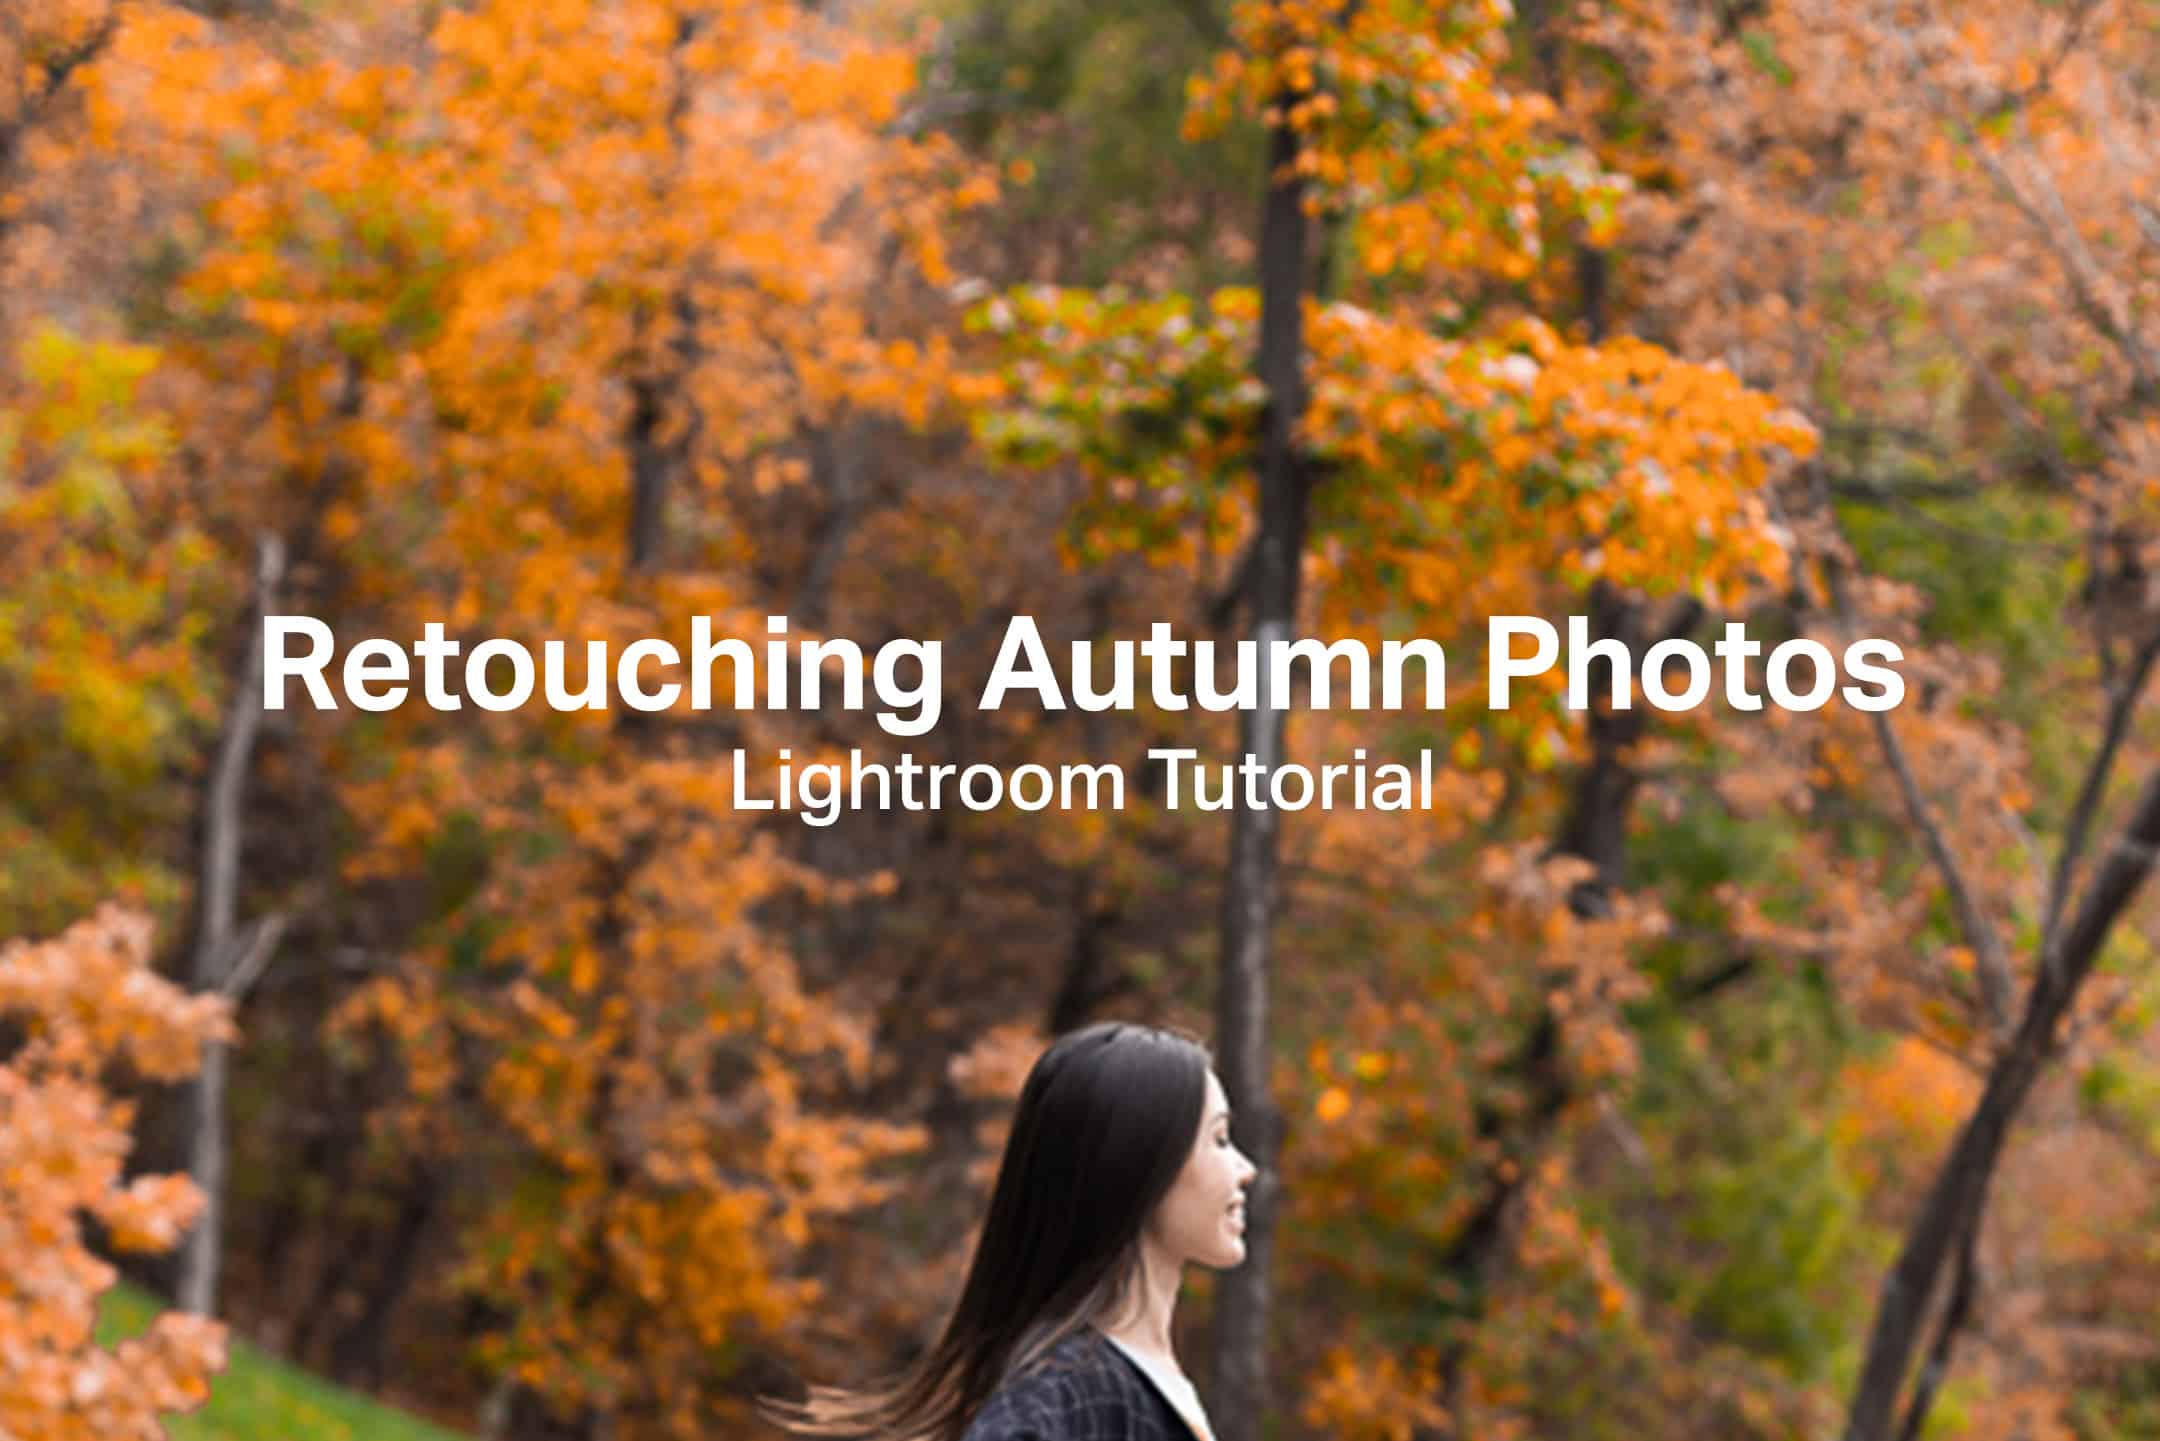 How to Transform Colors in an Autumn Photo